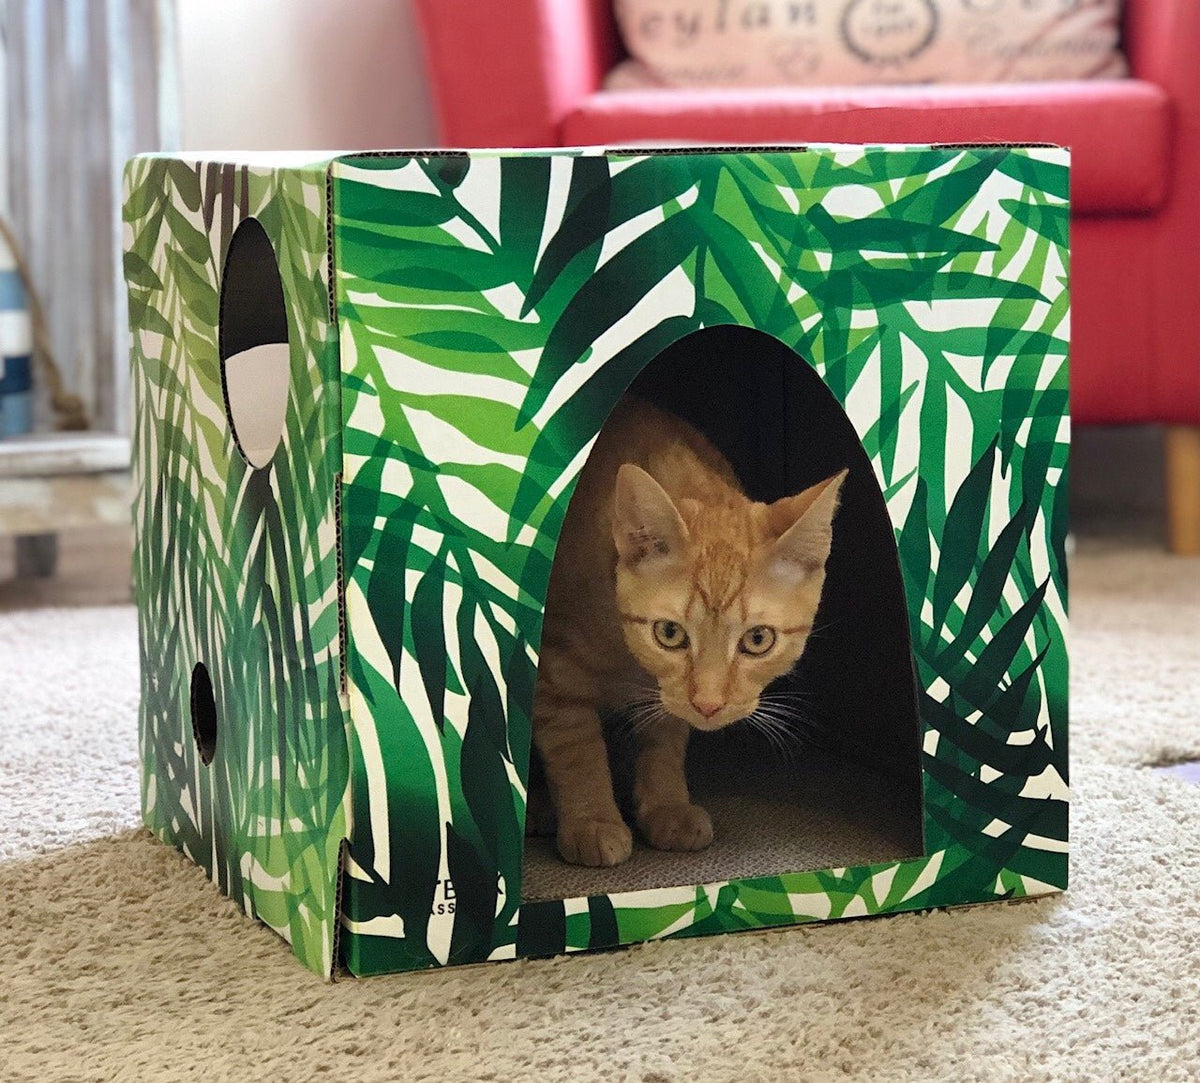 Orange tabby cat crouched in entrance to Kitty jungle cardboard cat house